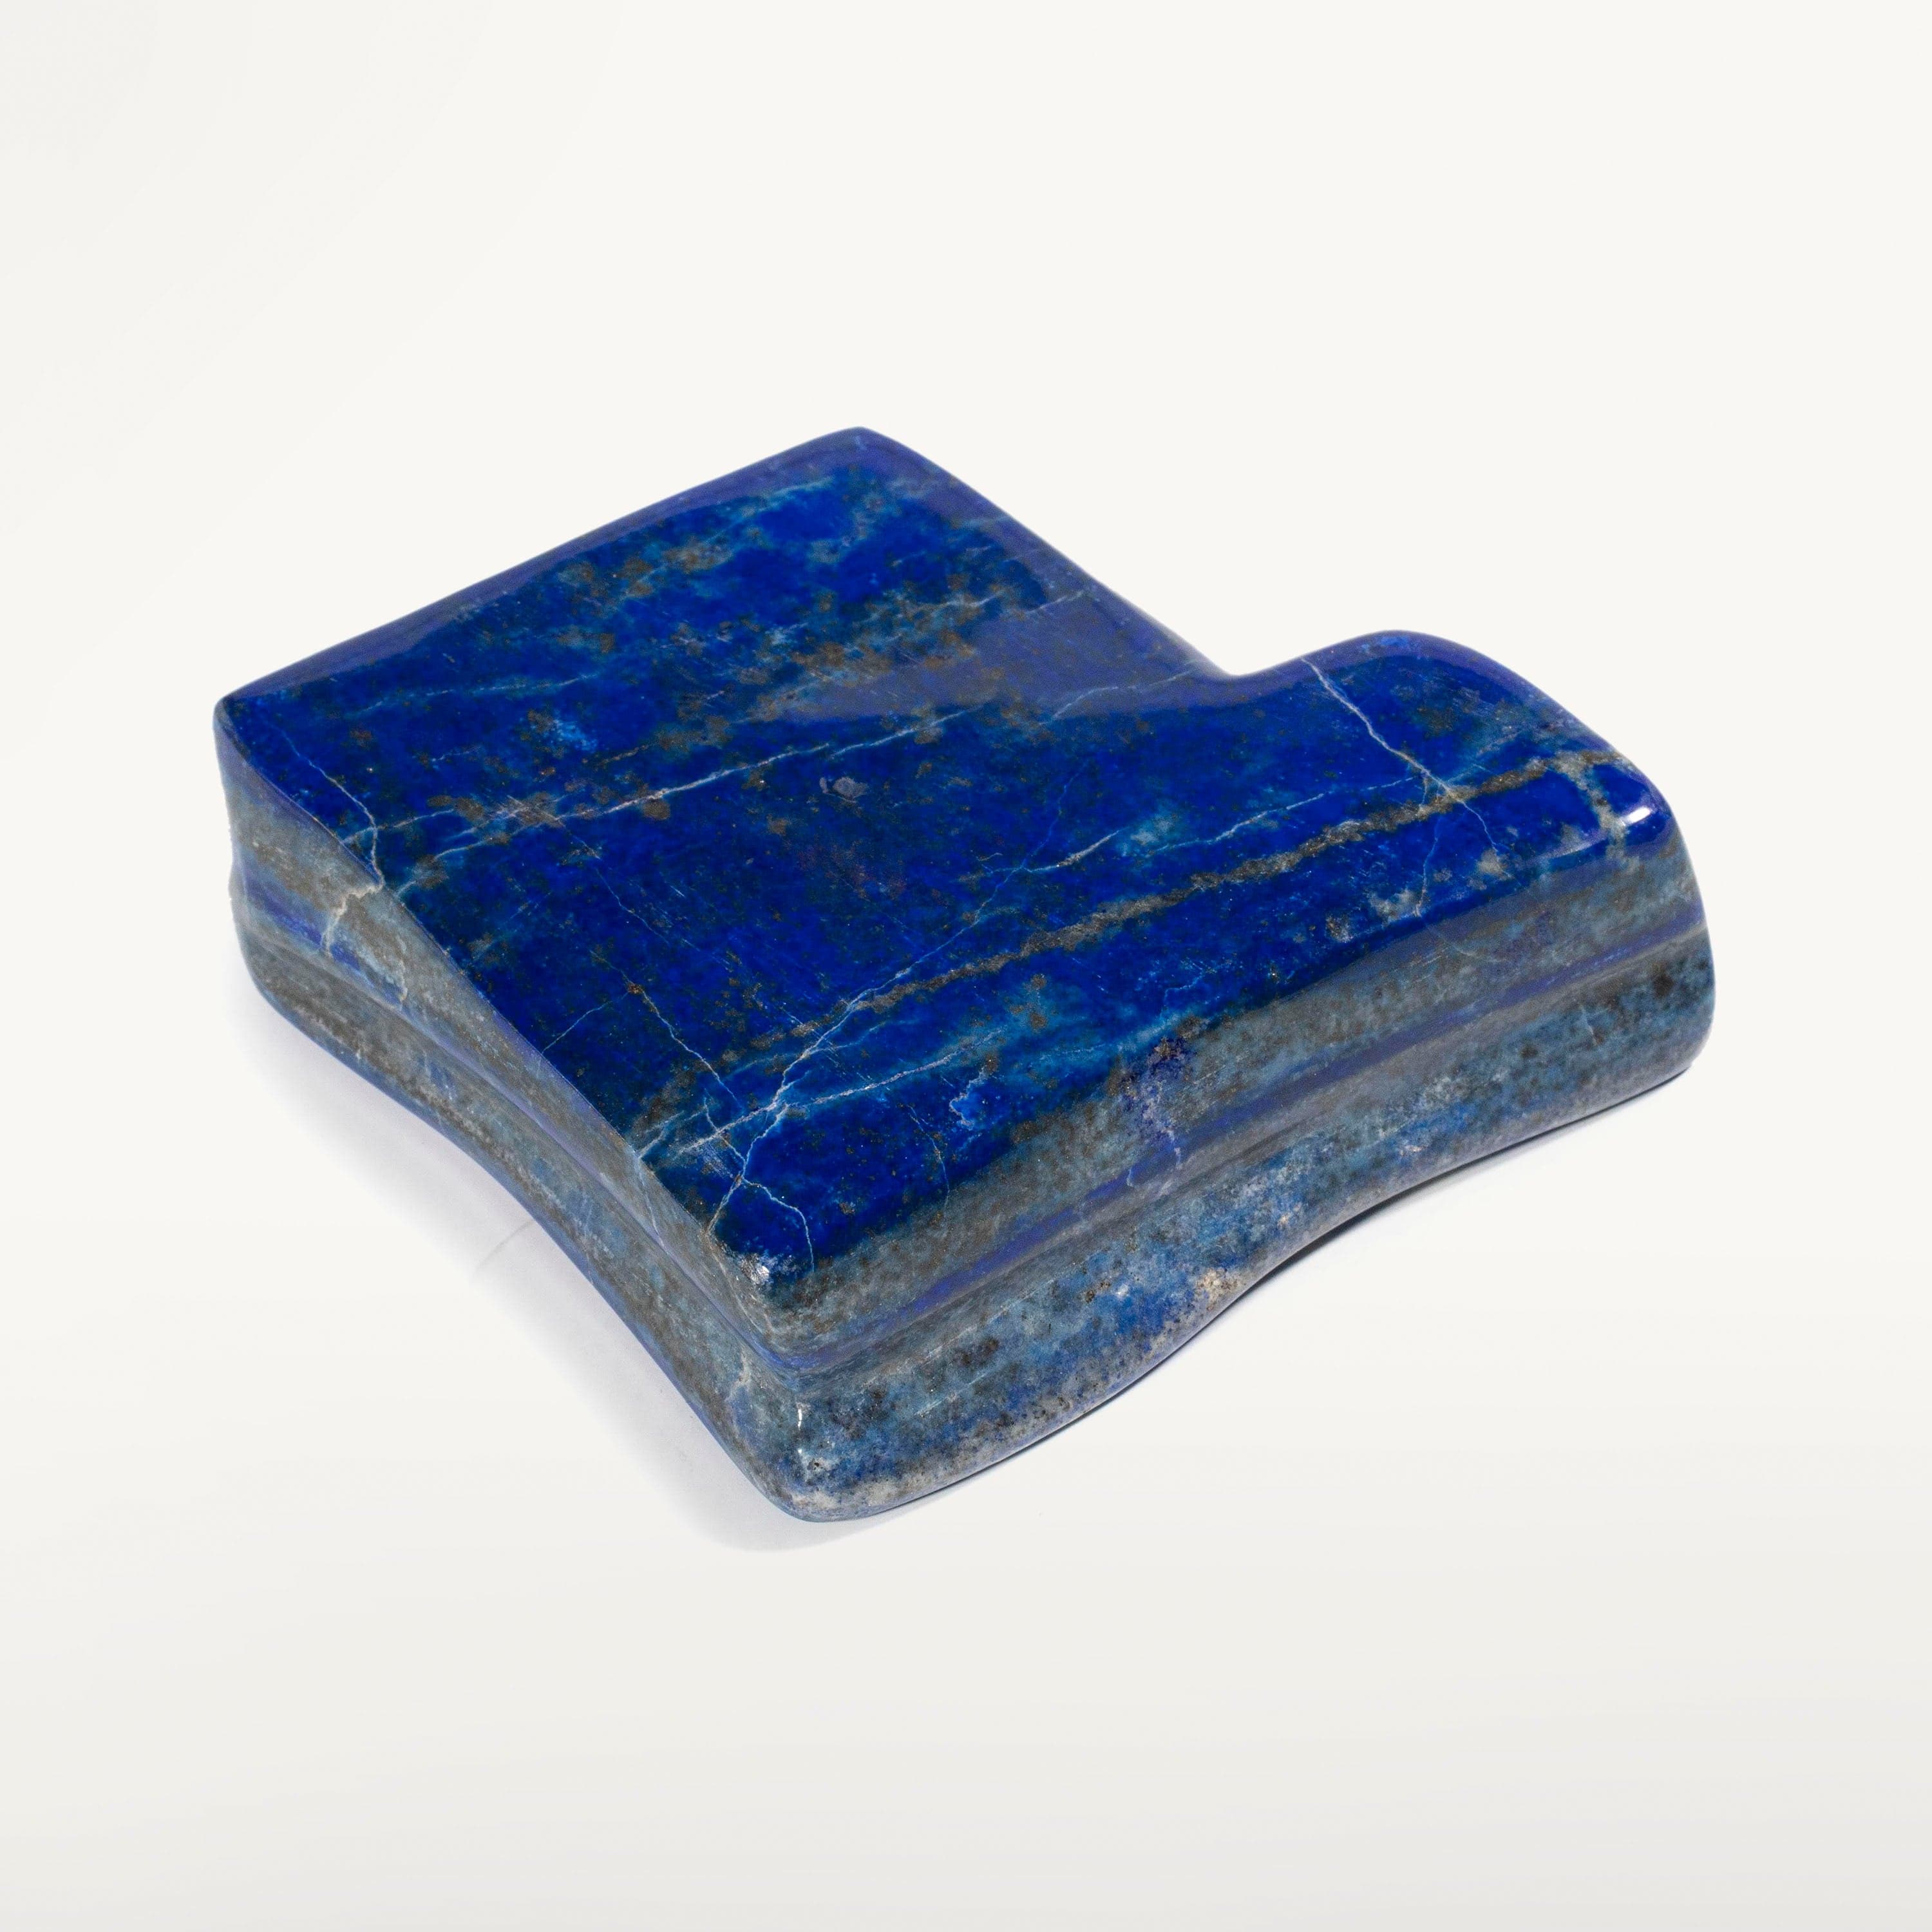 Kalifano Lapis Rare Natural Blue Polished Lapis Lazuli Freeform Carving from Afghanistan - 1280 g / 2.8 lbs LPS1400.002